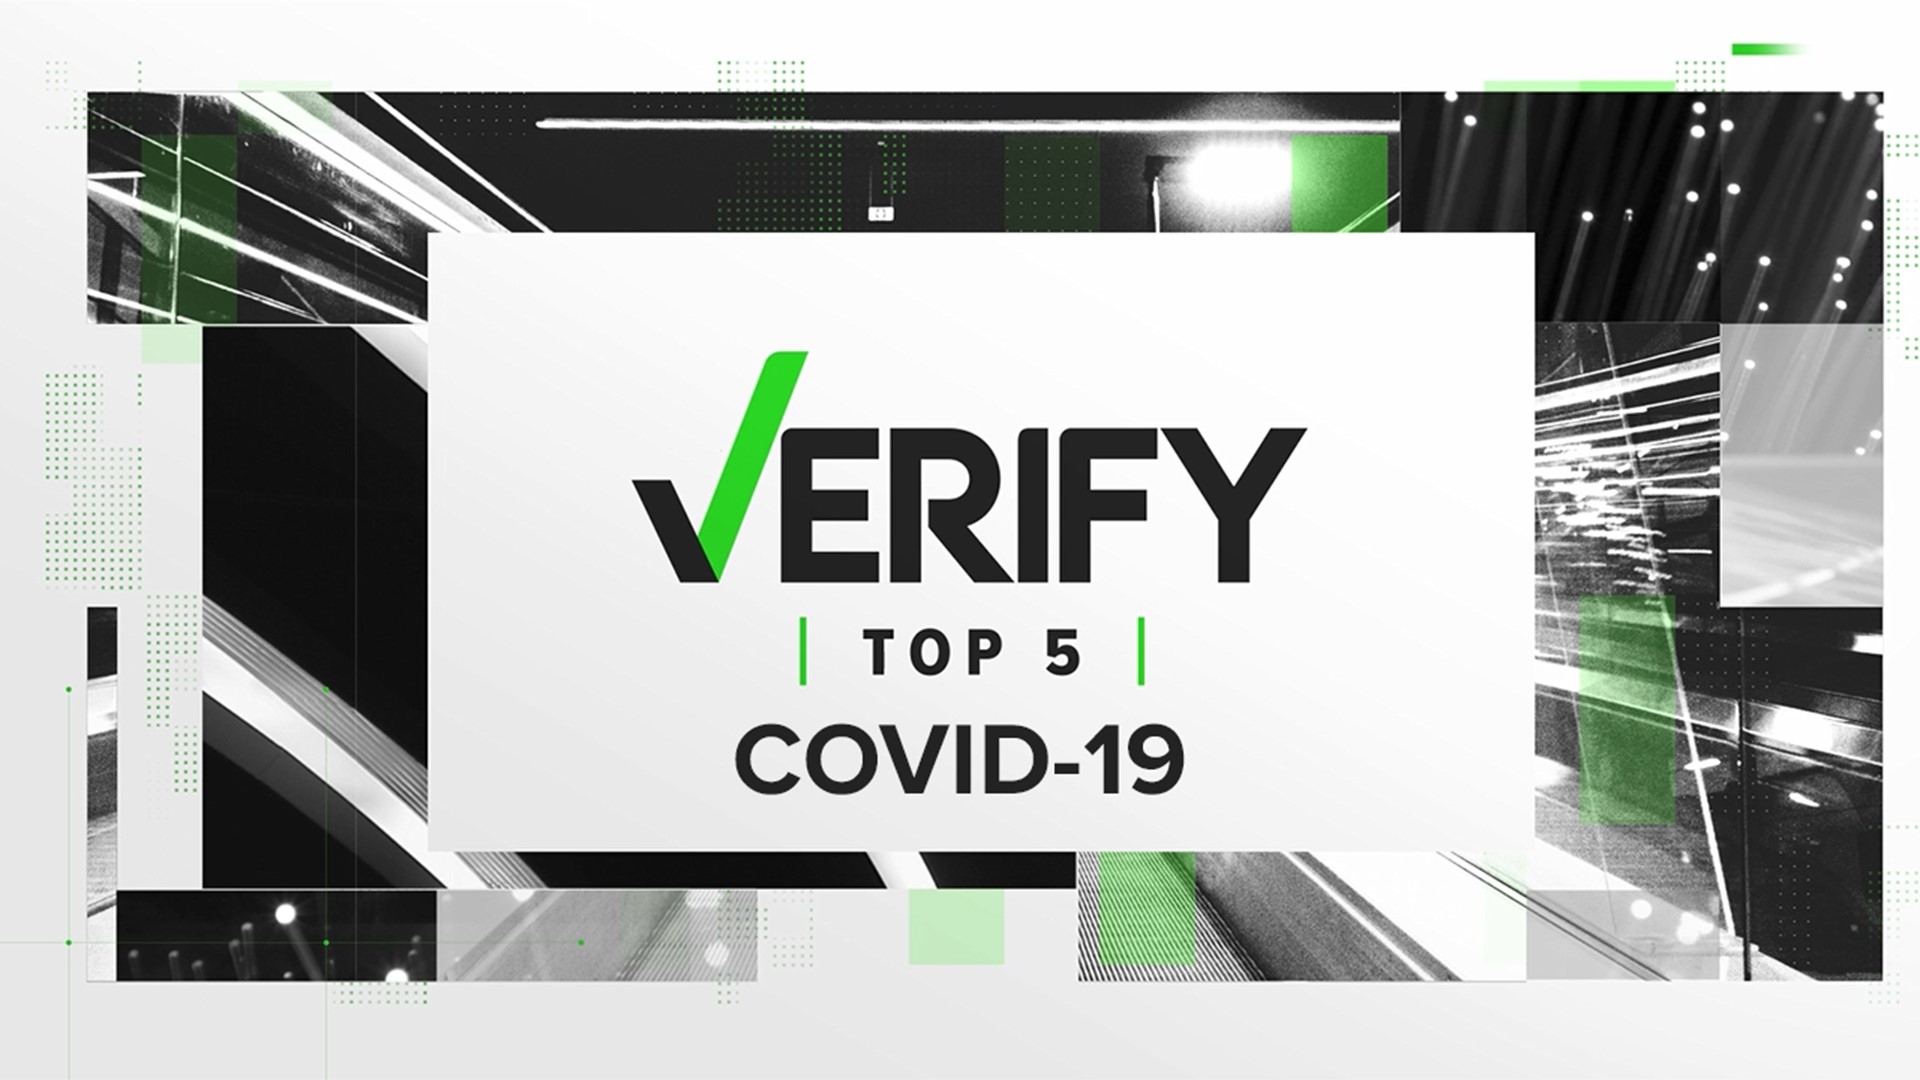 VERIFY has covered dozens of stories about COVID-19 this year. Here are the top five most-read stories about the virus from our website.